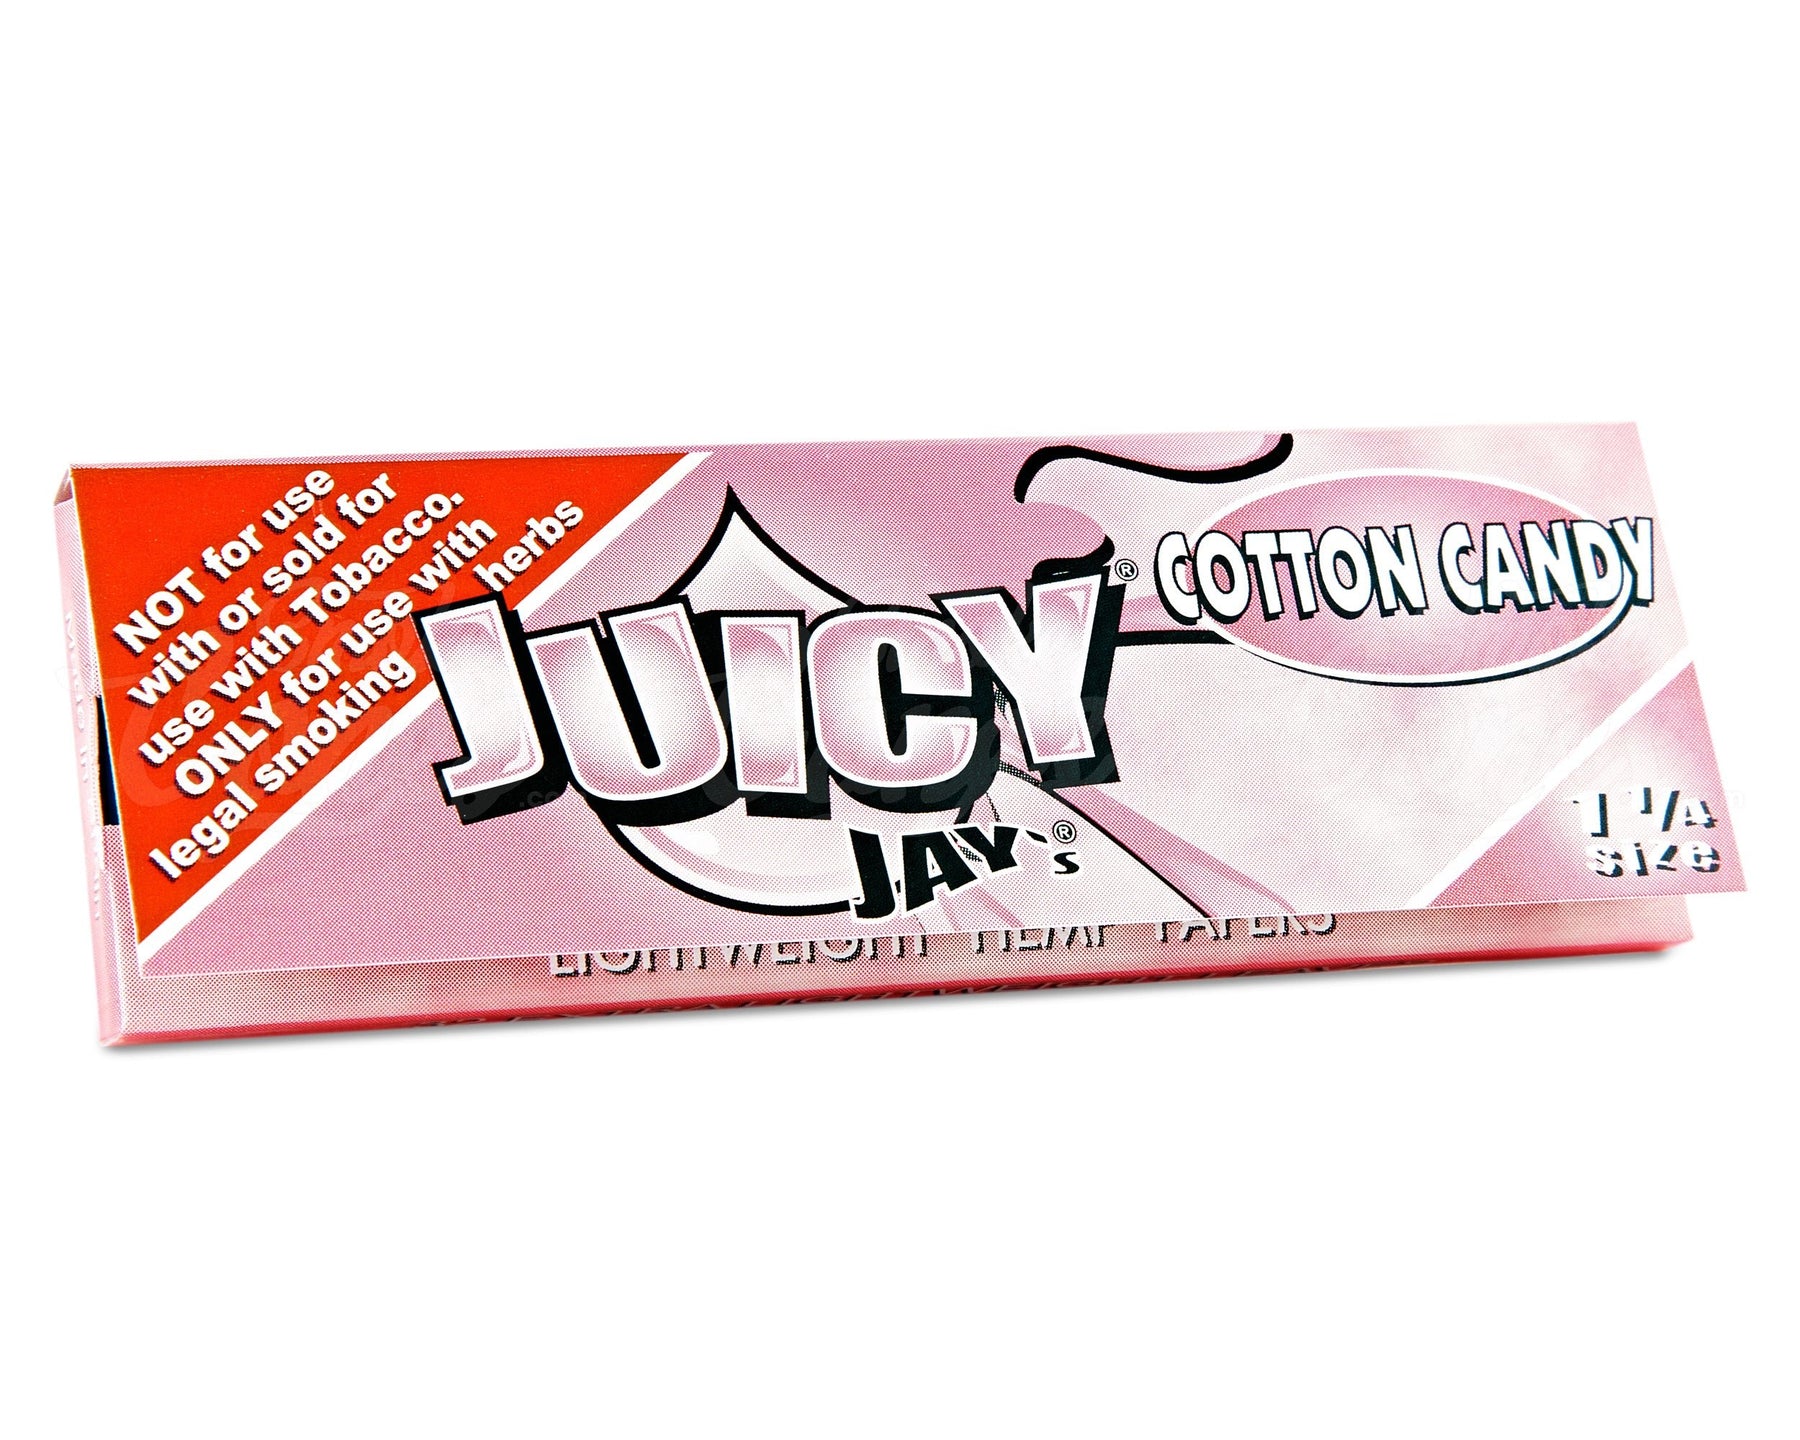 Juicy Jay's 1 1-4 Size Cotton Candy Flavored Hemp Rolling Papers 24/Box - 2